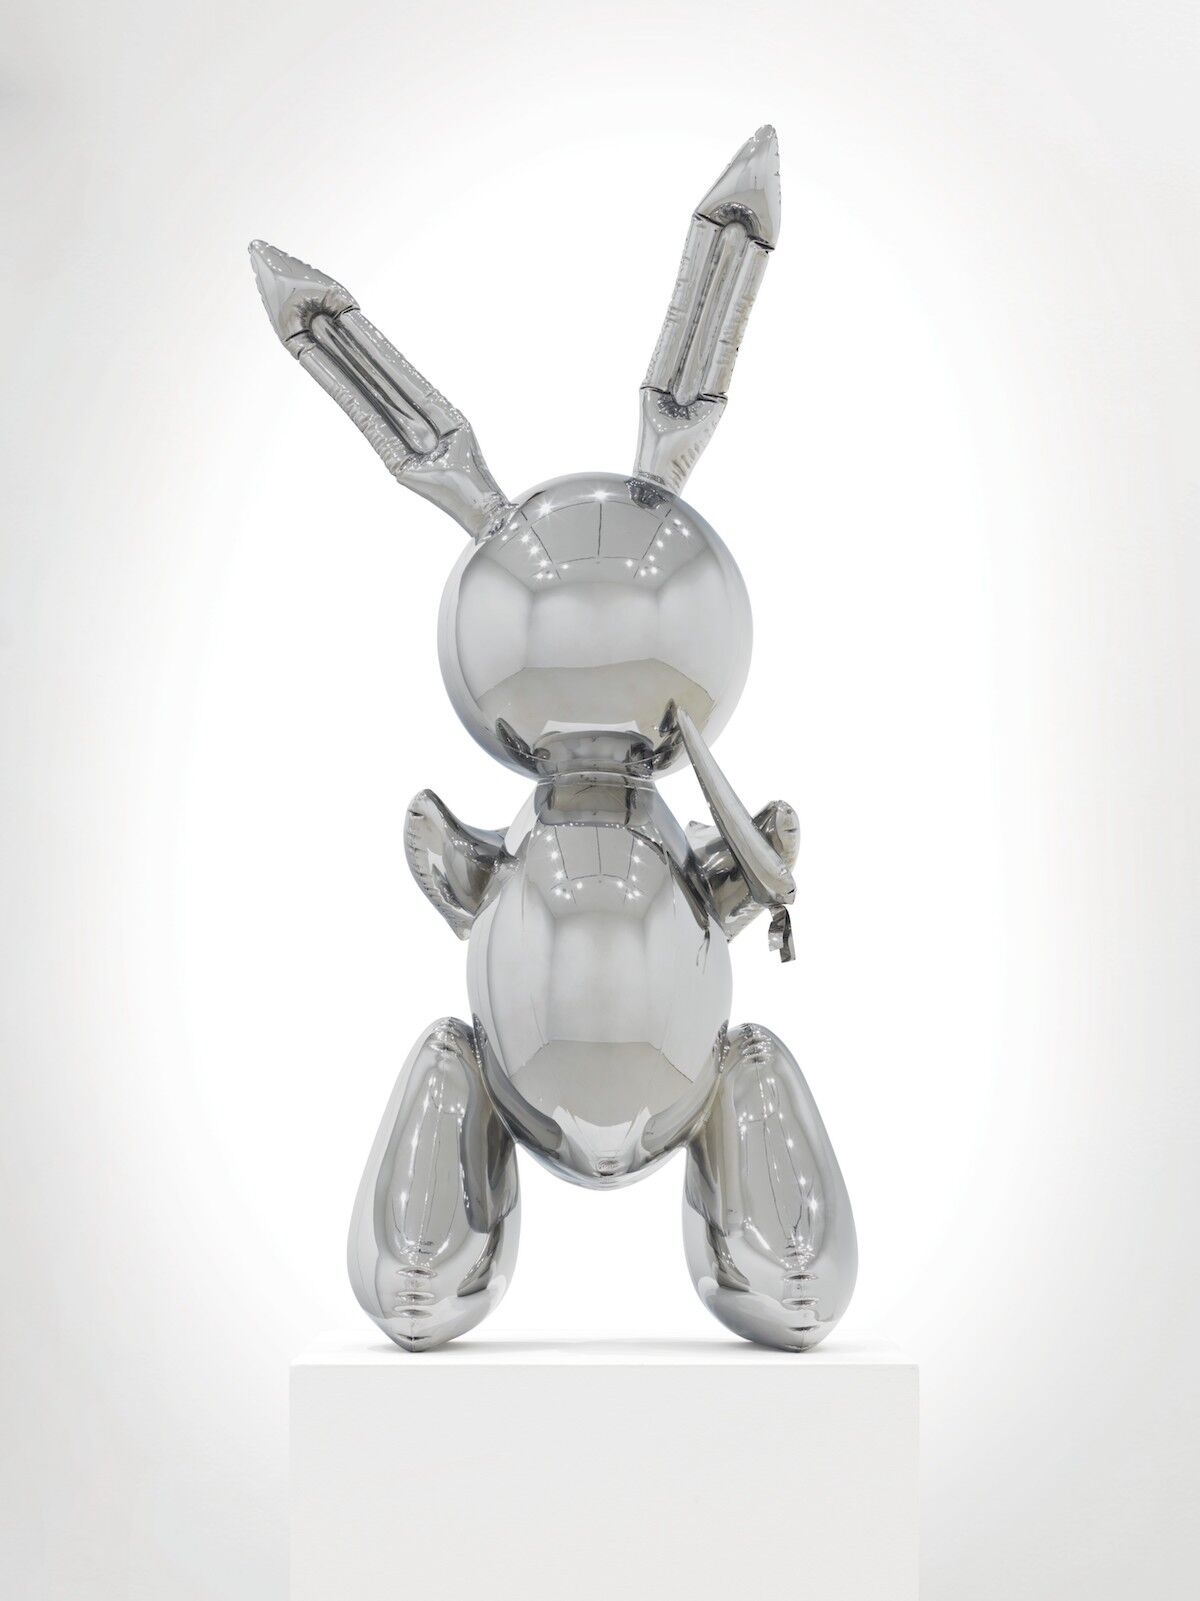 Jeff Koons, Rabbit, 1986, stainless steel. This work is number two from an edition of three plus one artist&#x27;s proof. Est. $50 million–$70 million. Courtesy Christie’s Images Ltd. 2019.